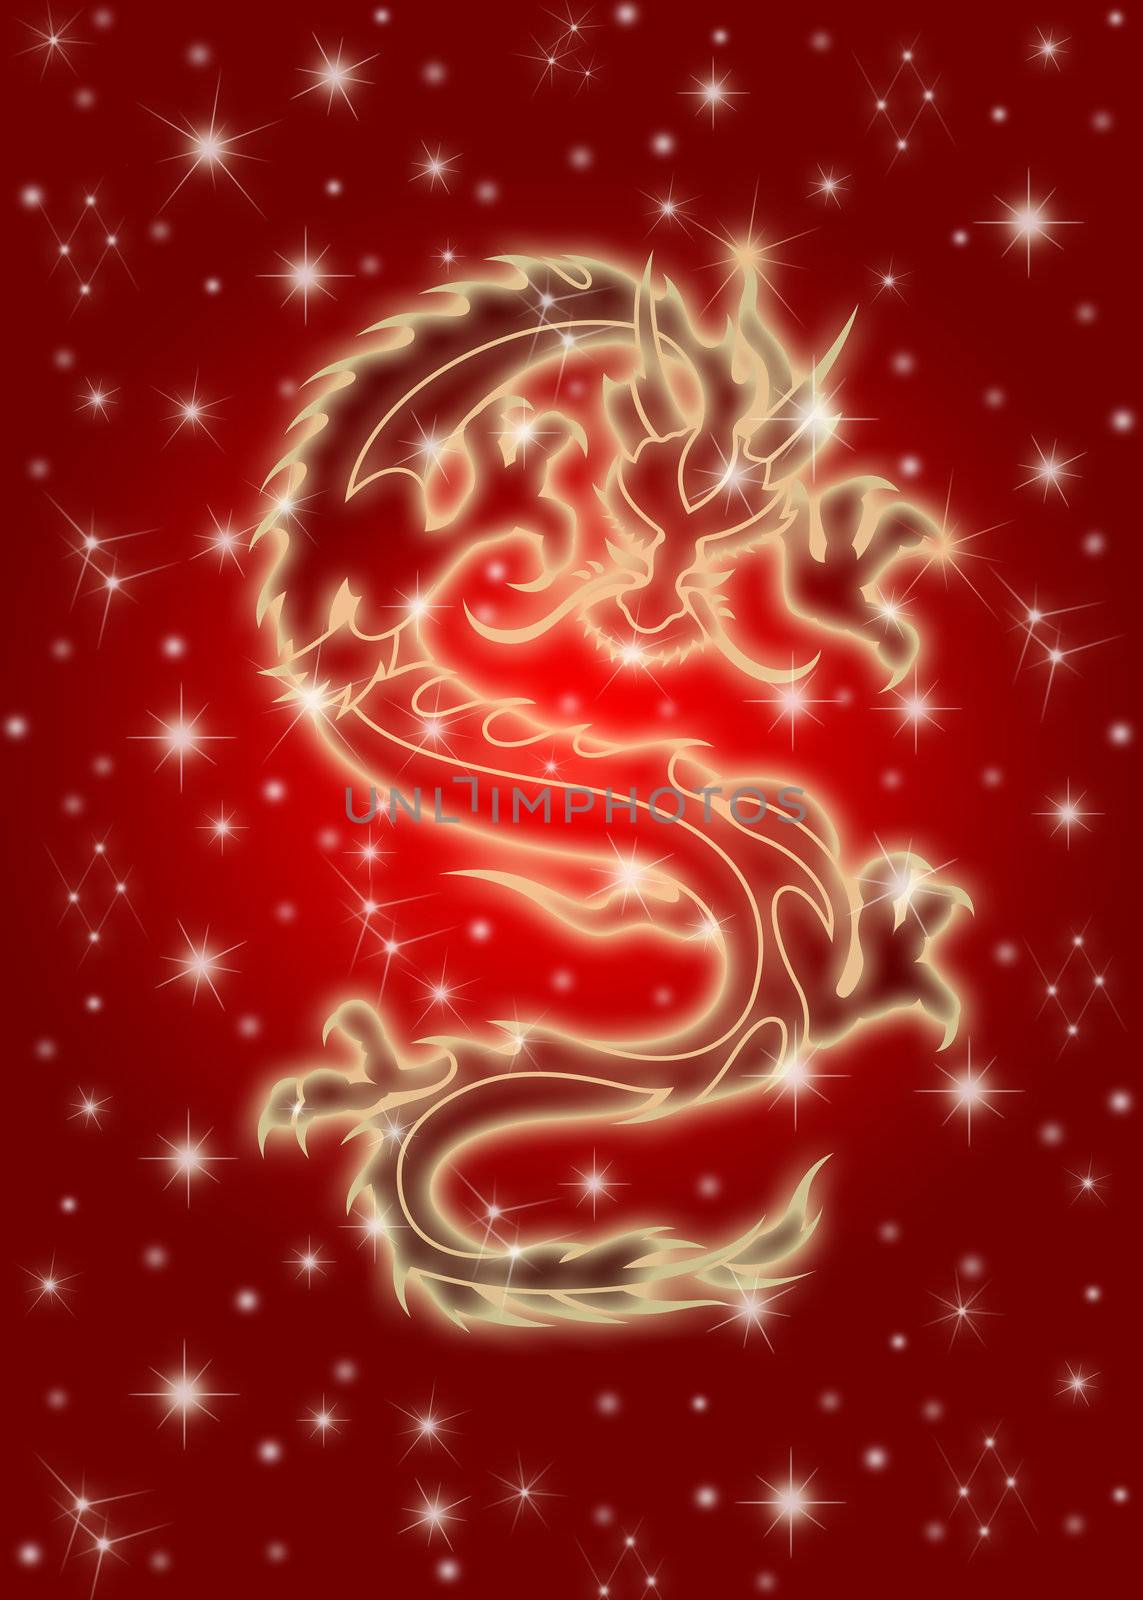 Celestial Chinese Dragon on Red Background by jpldesigns